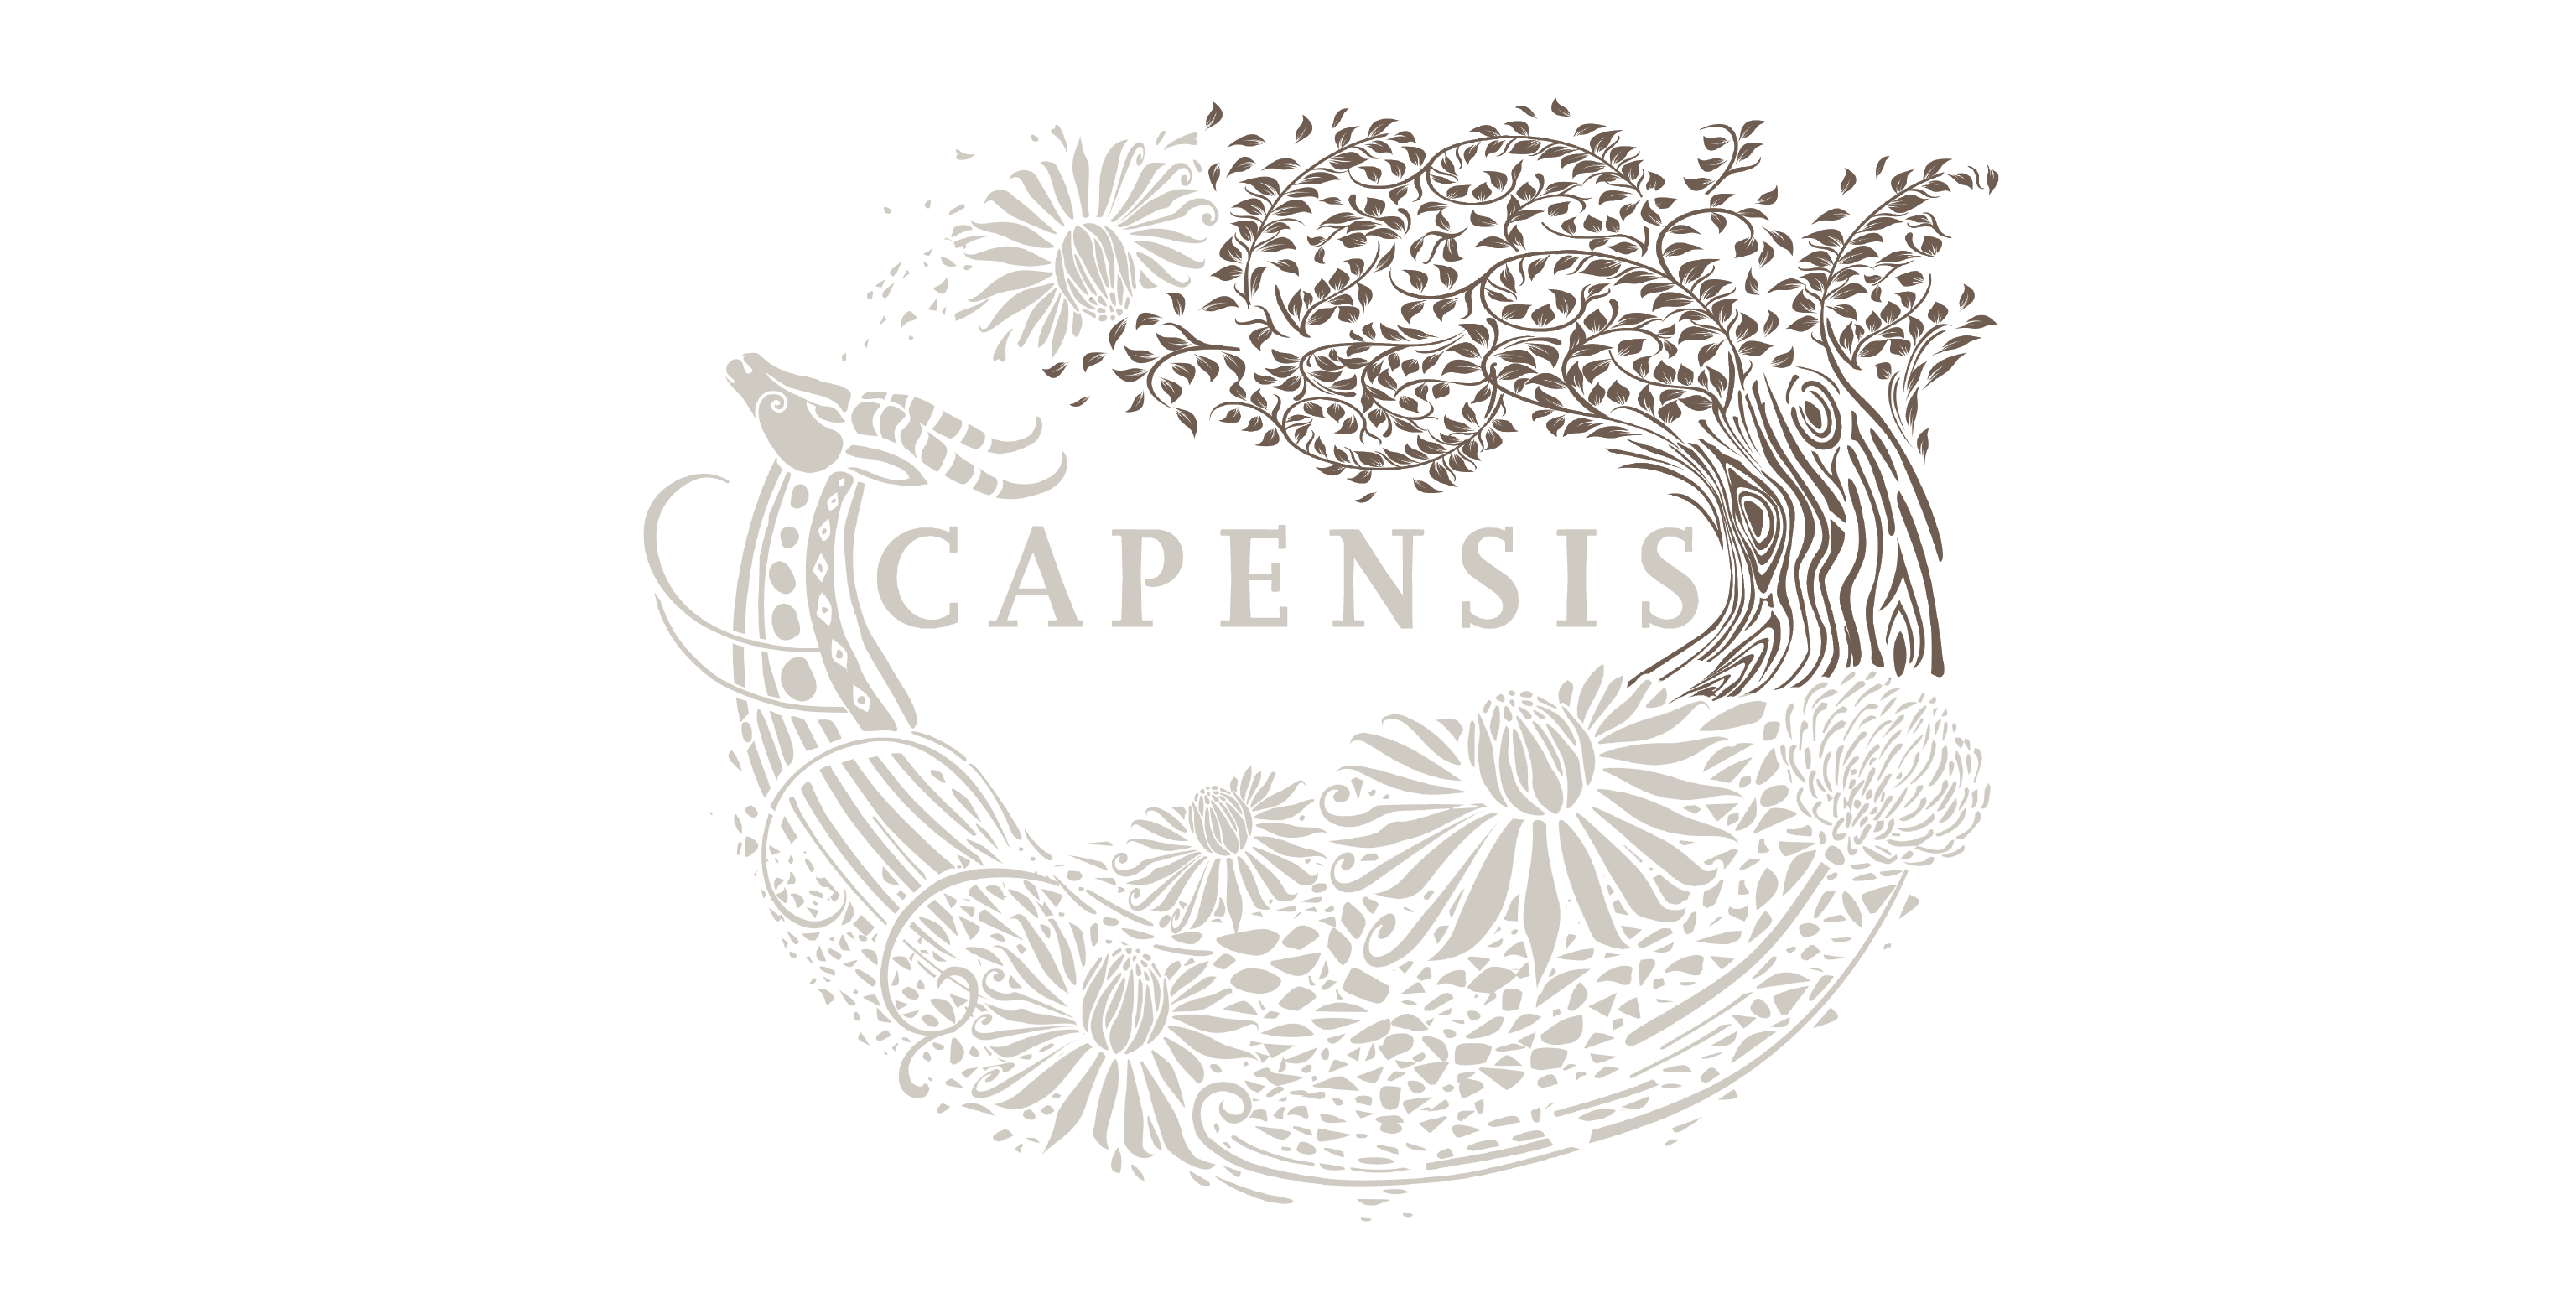 Capensis label with Marula Tree highlighted